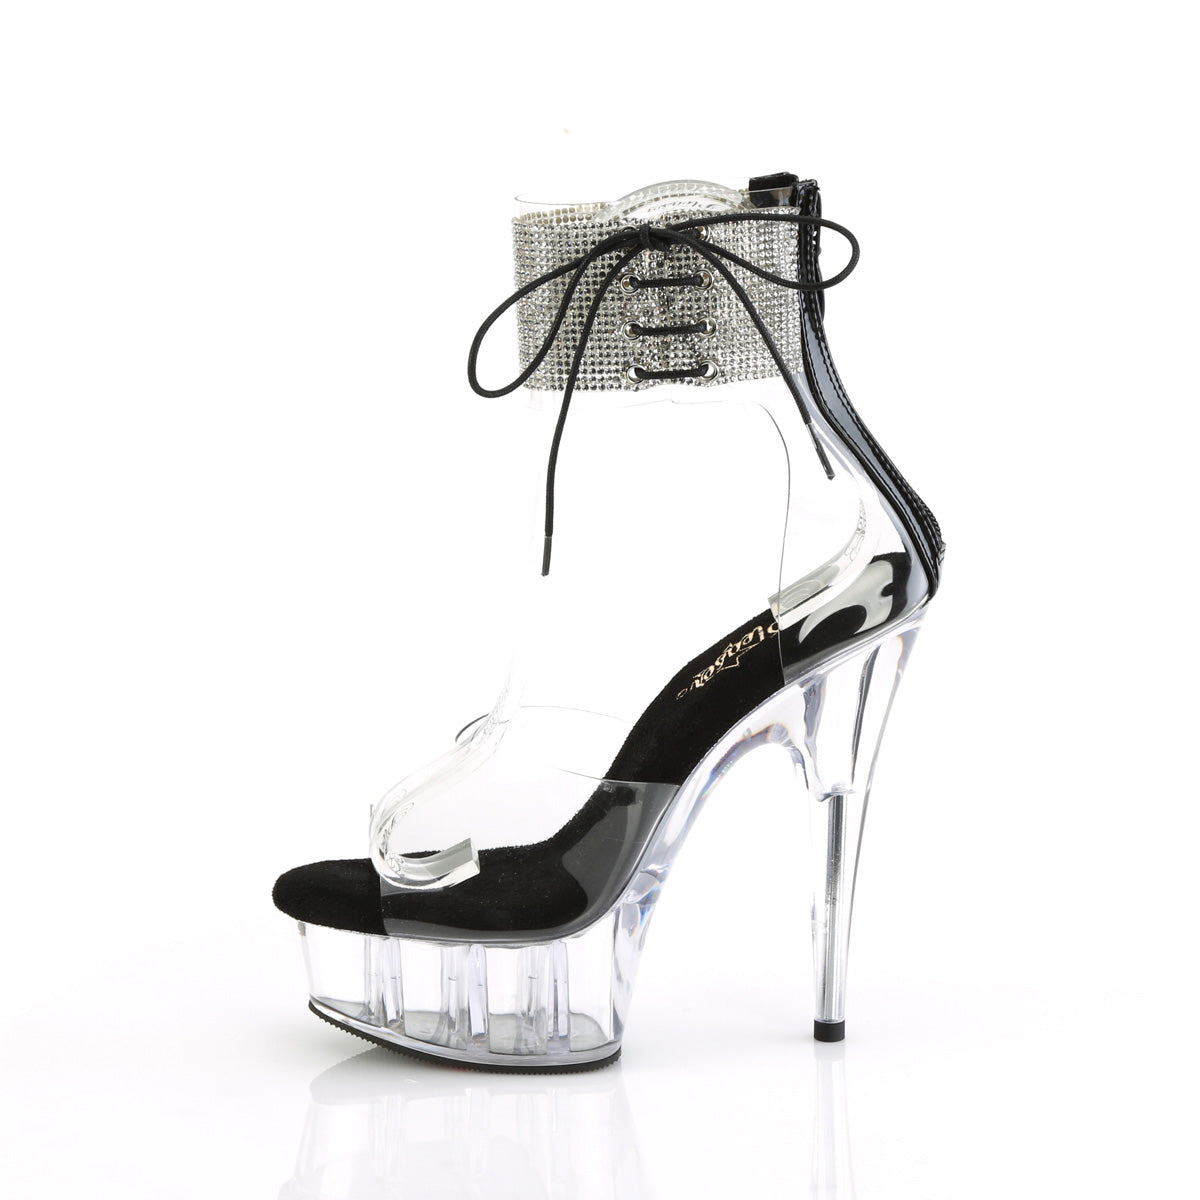 DELIGHT-624RS Ankle Peep Toe High Heel Silver & Clear Multi view 4